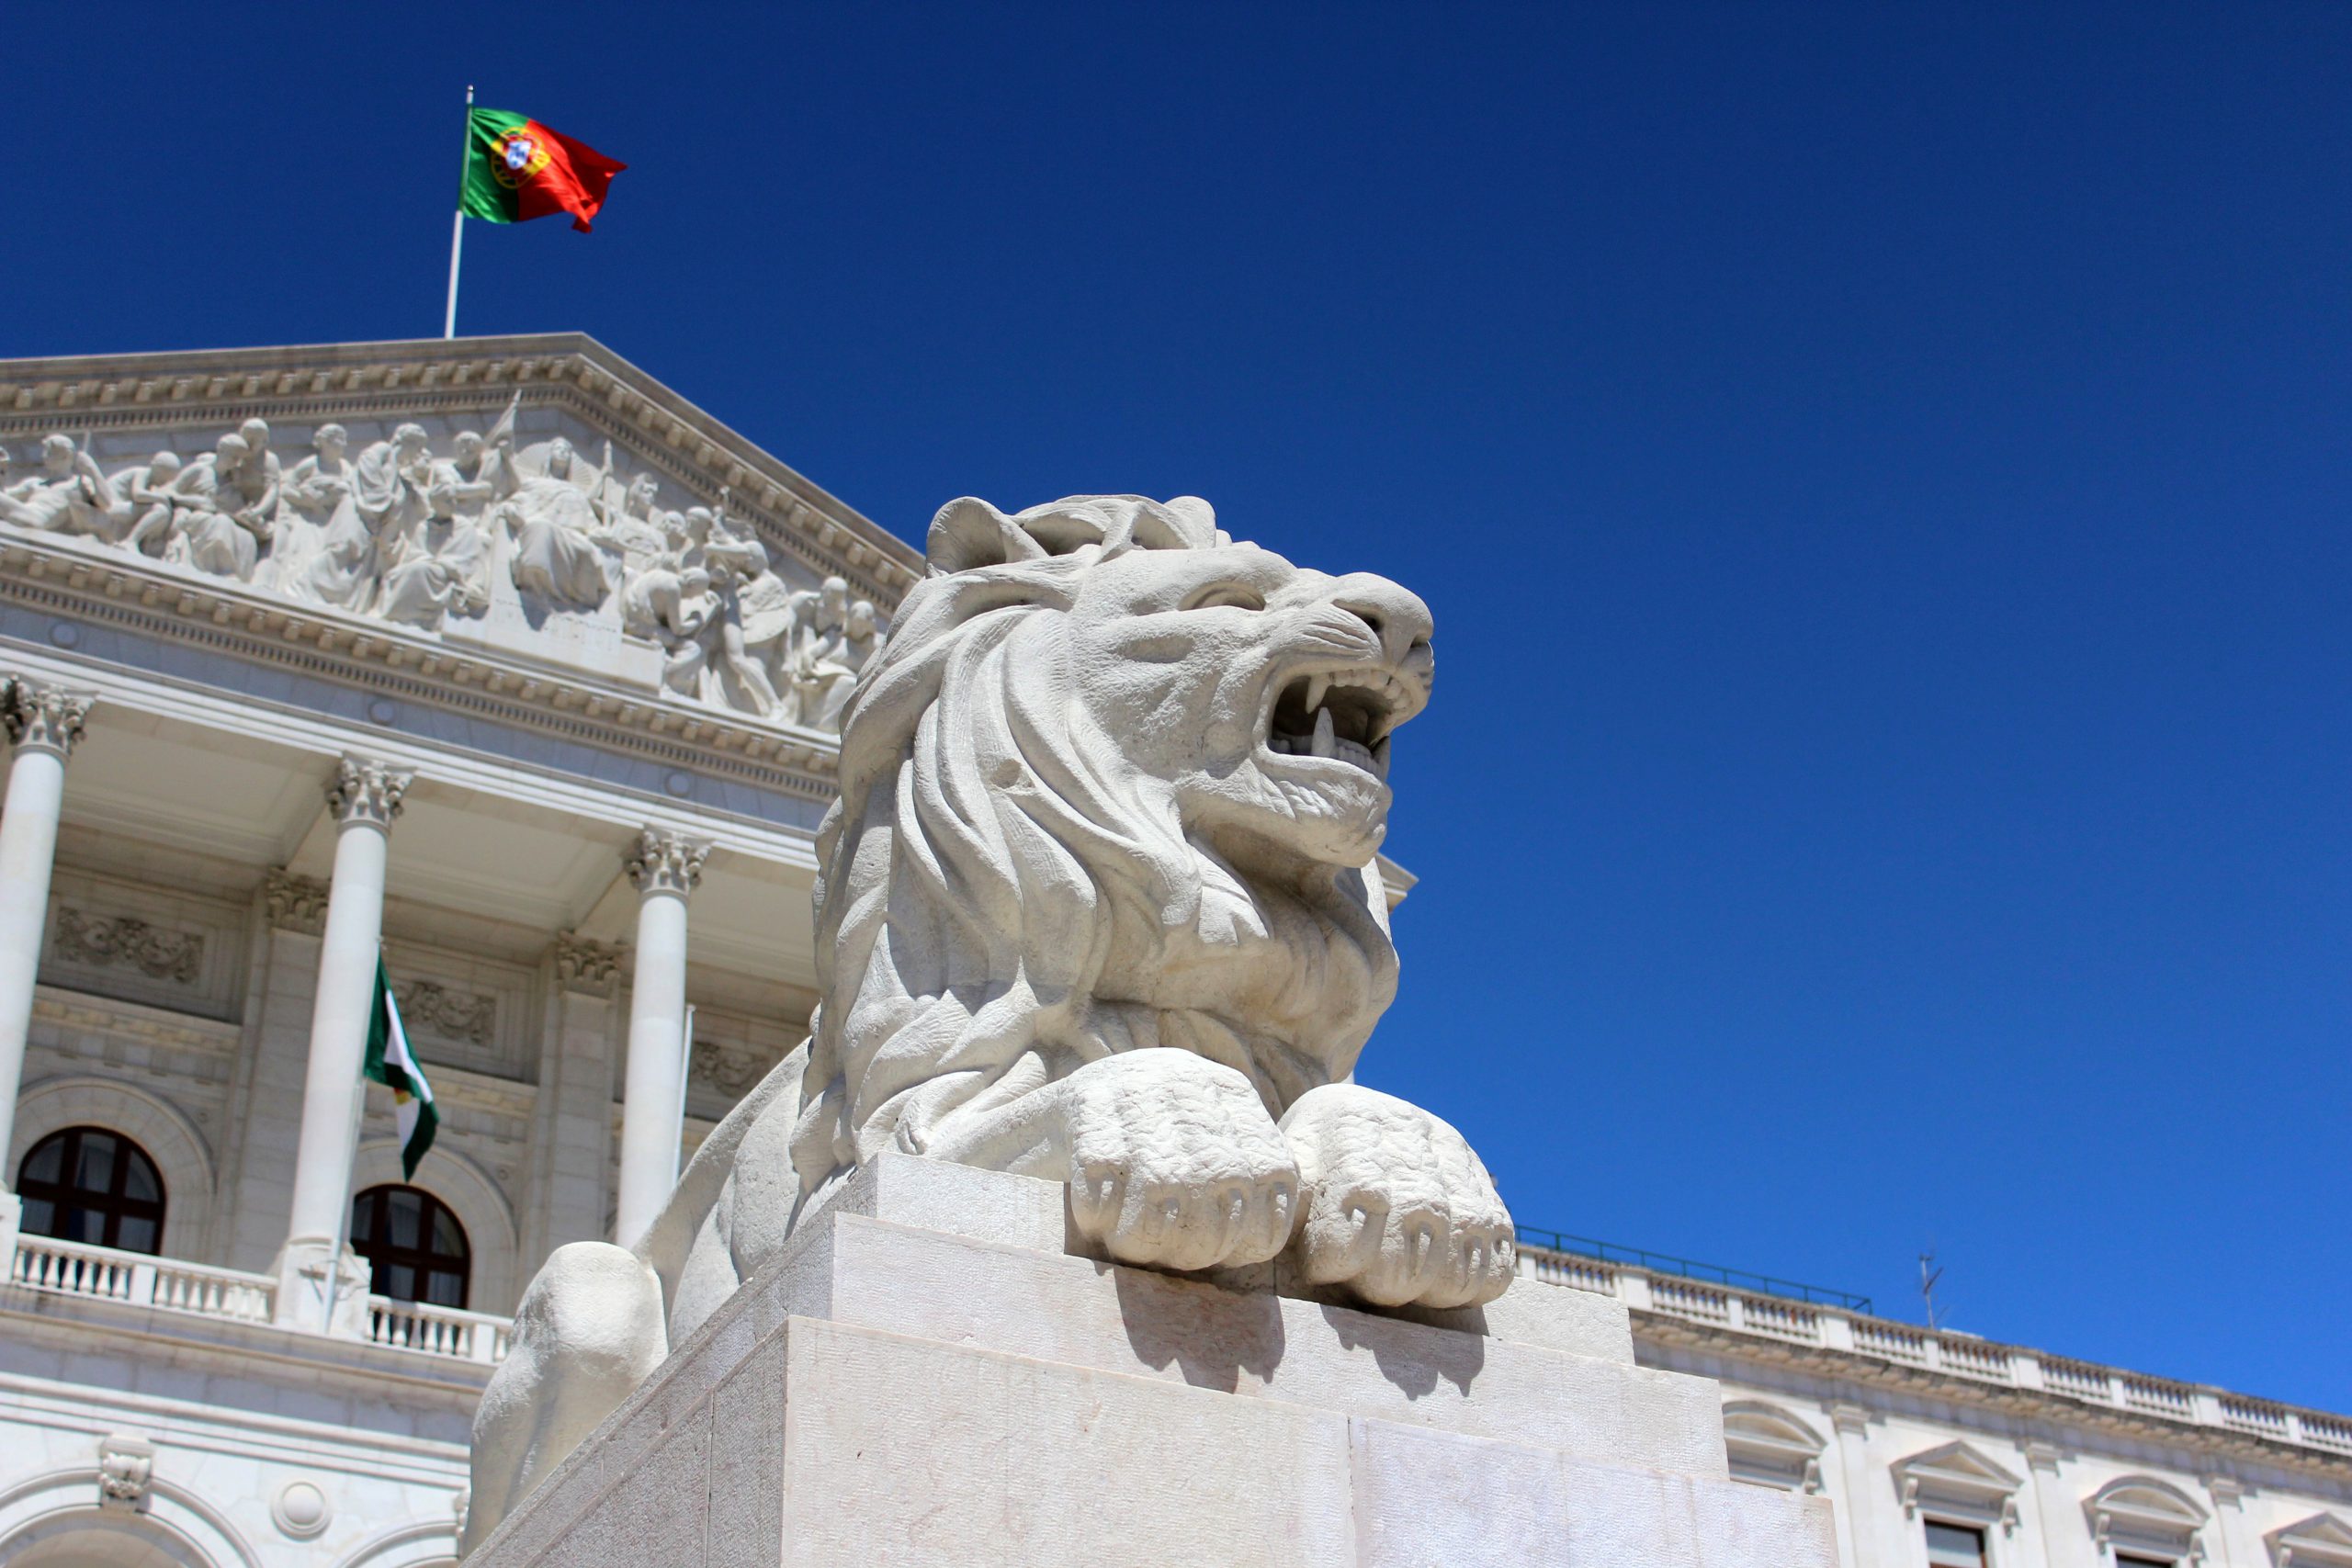 Portugal implements EU whistleblower protection directive with deviations